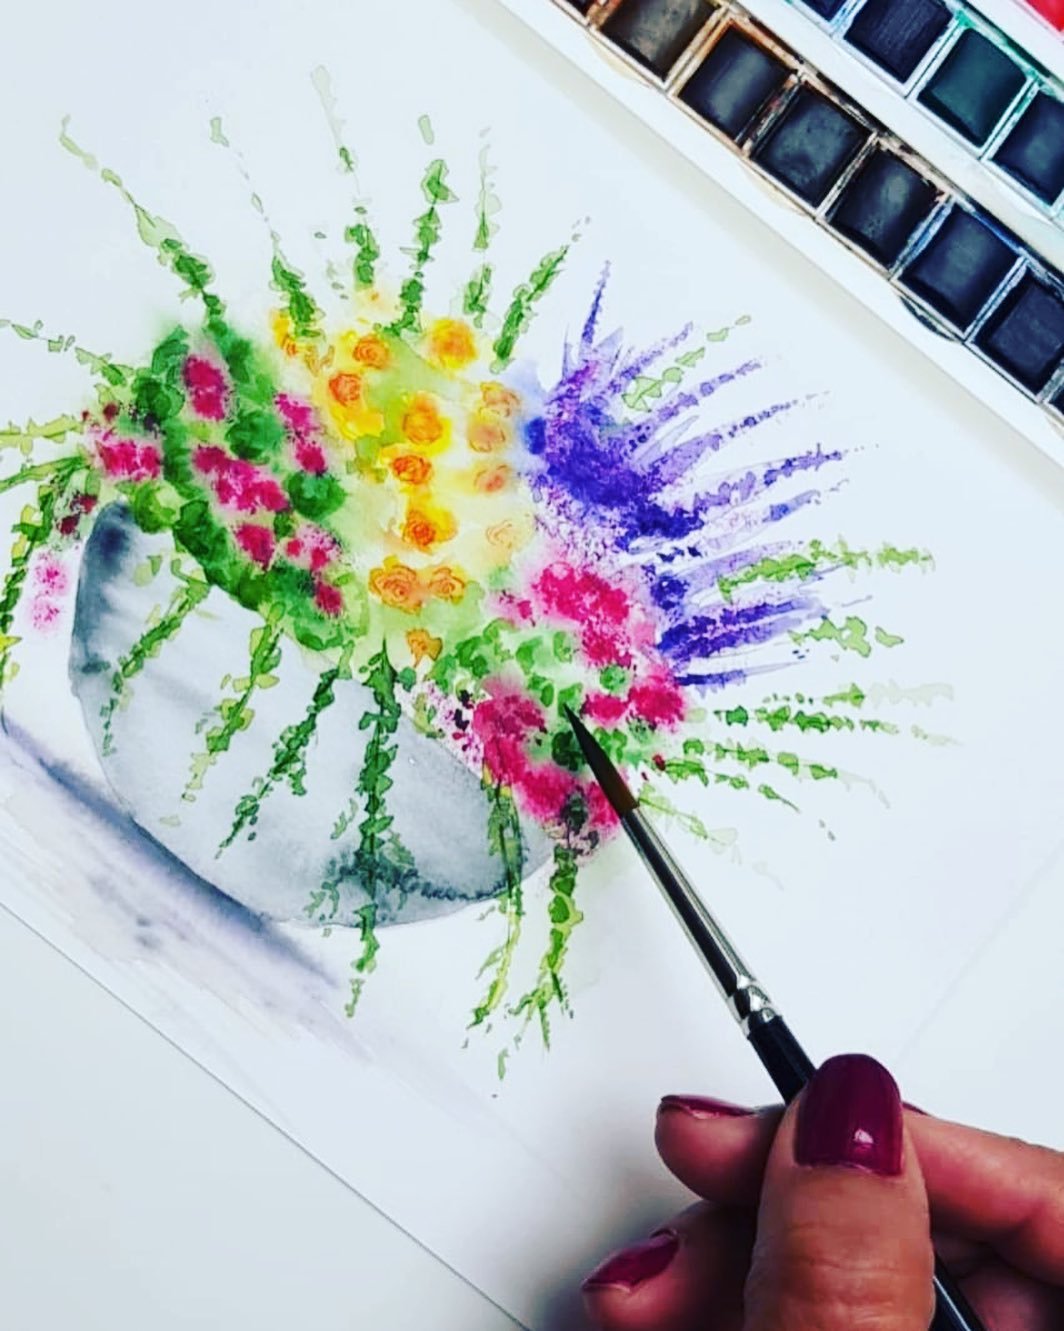 Watercolour Techniques for All - 4 week Online Course Tuesday Evenings Via Zoom